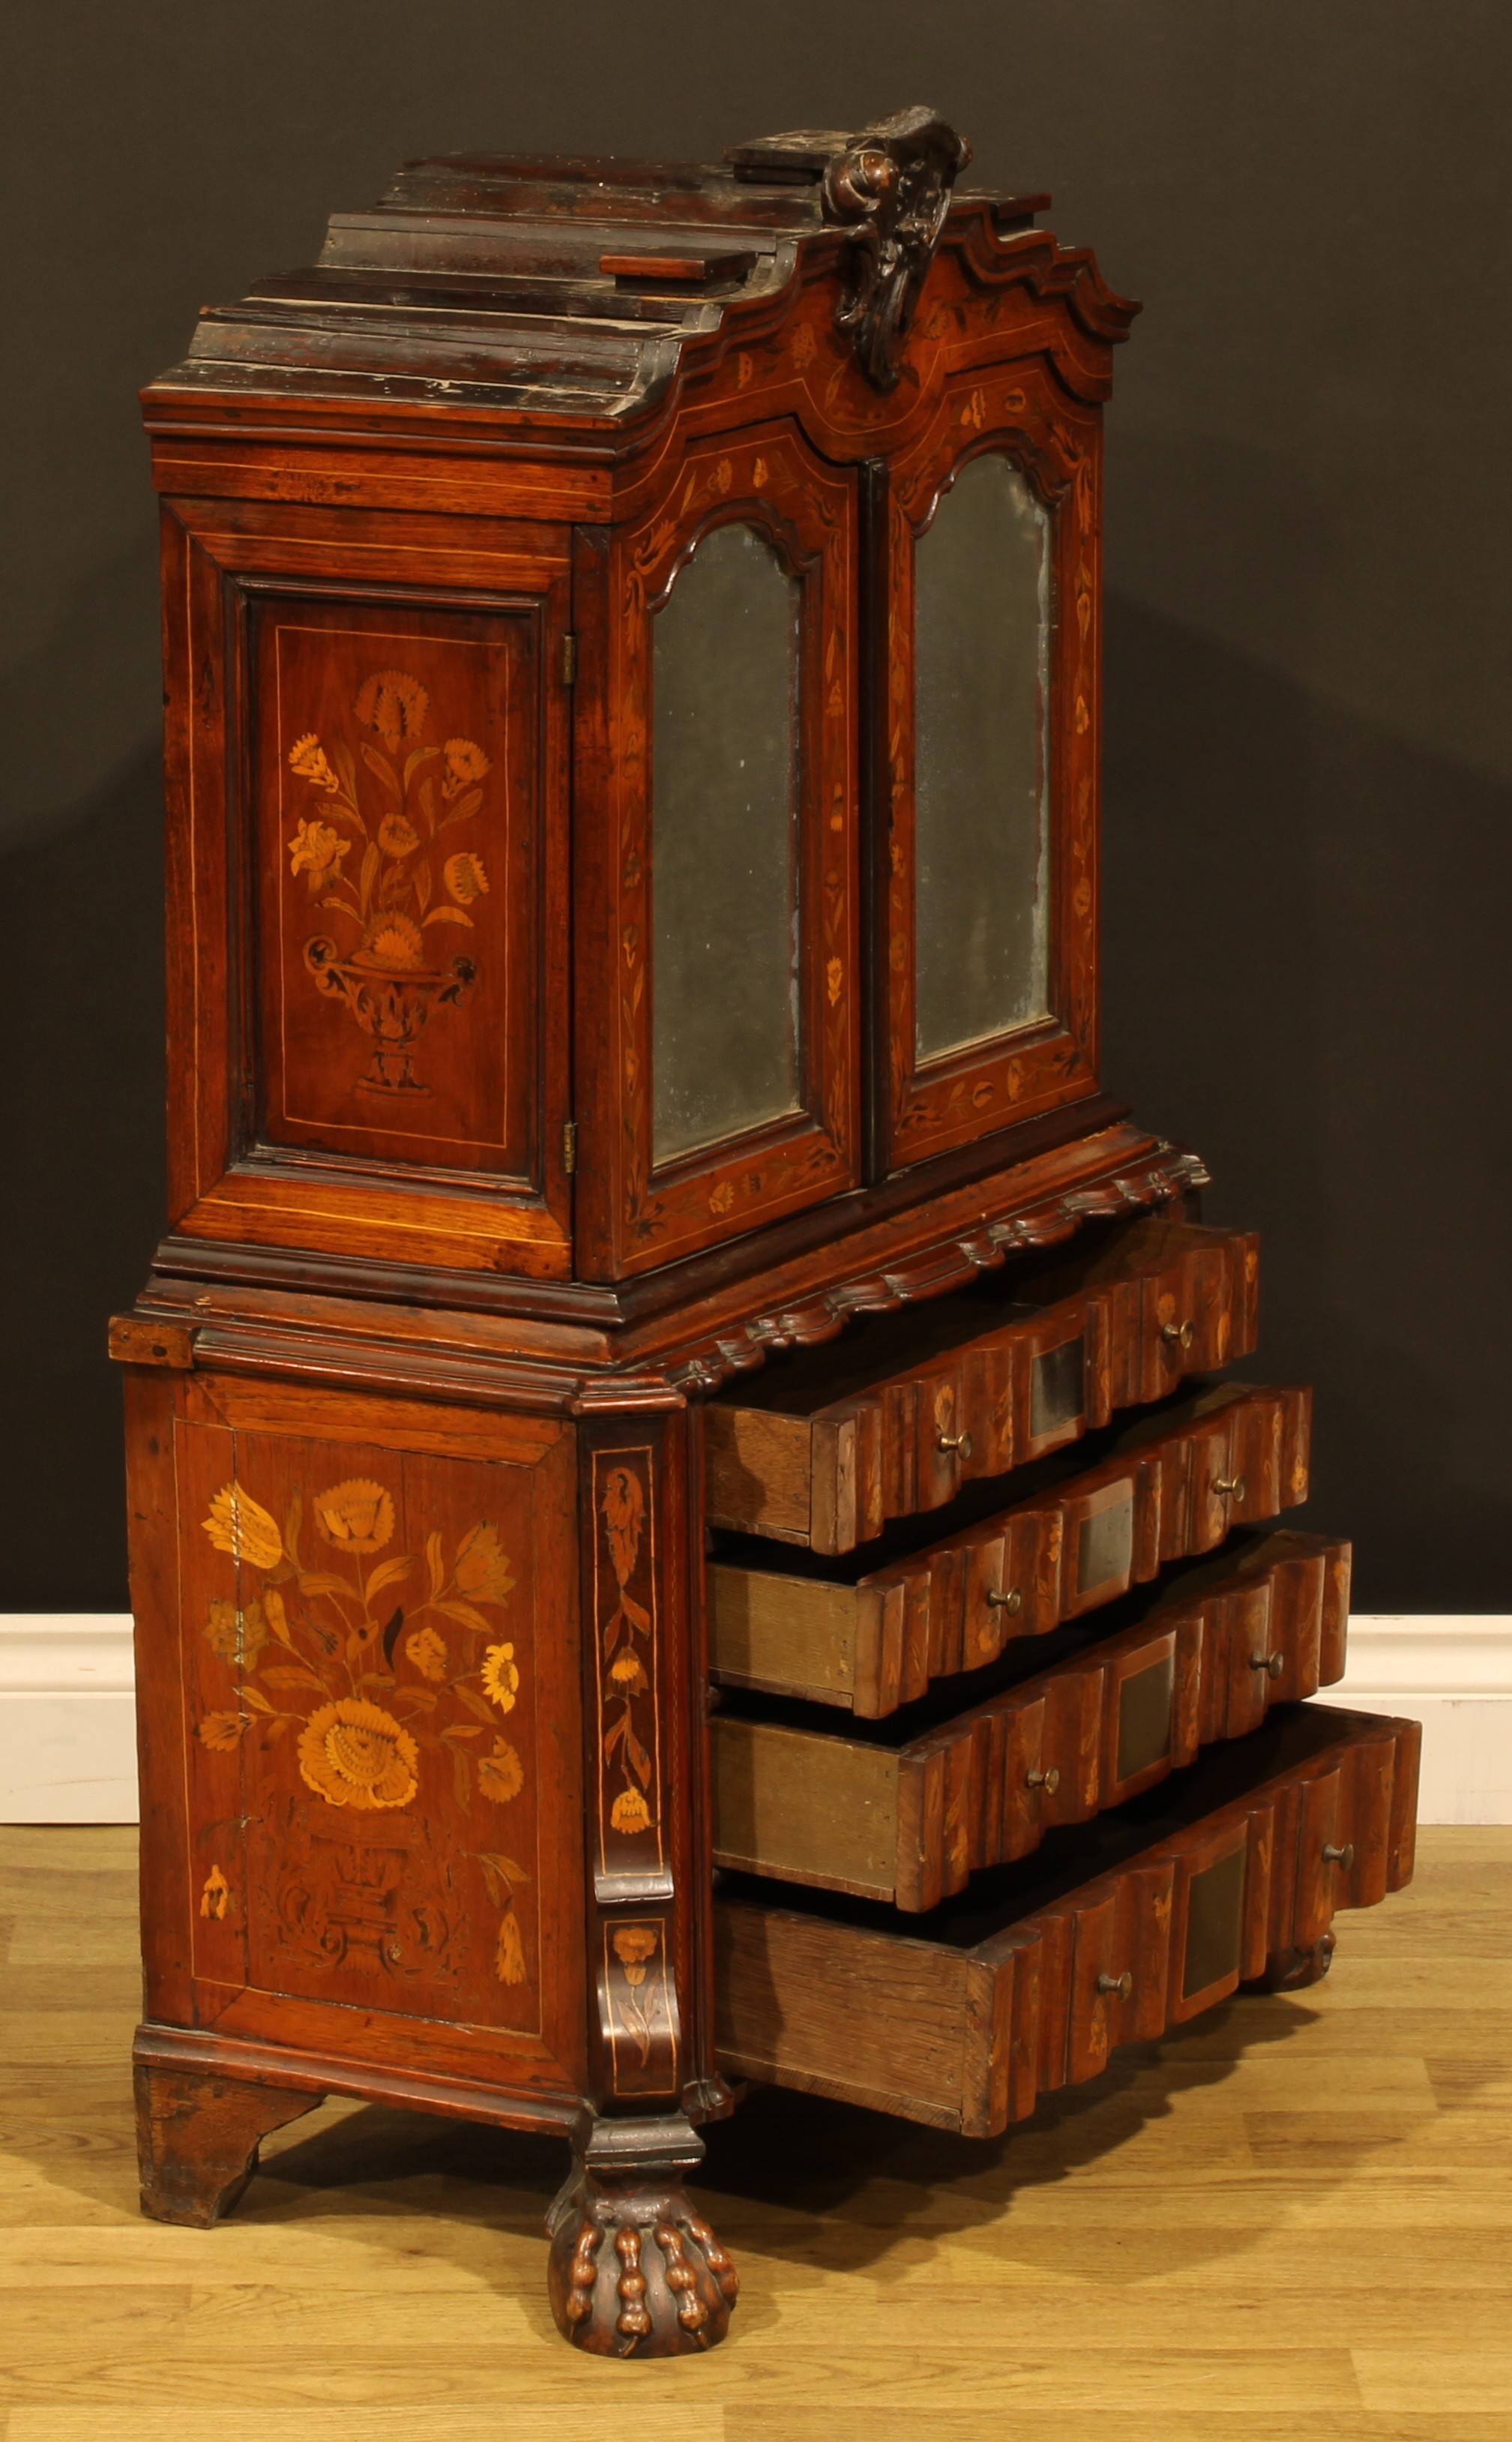 Miniature Furniture - an unusual 19th century Dutch marquetry arc-en-arbalète enclosed collector’s - Image 3 of 5